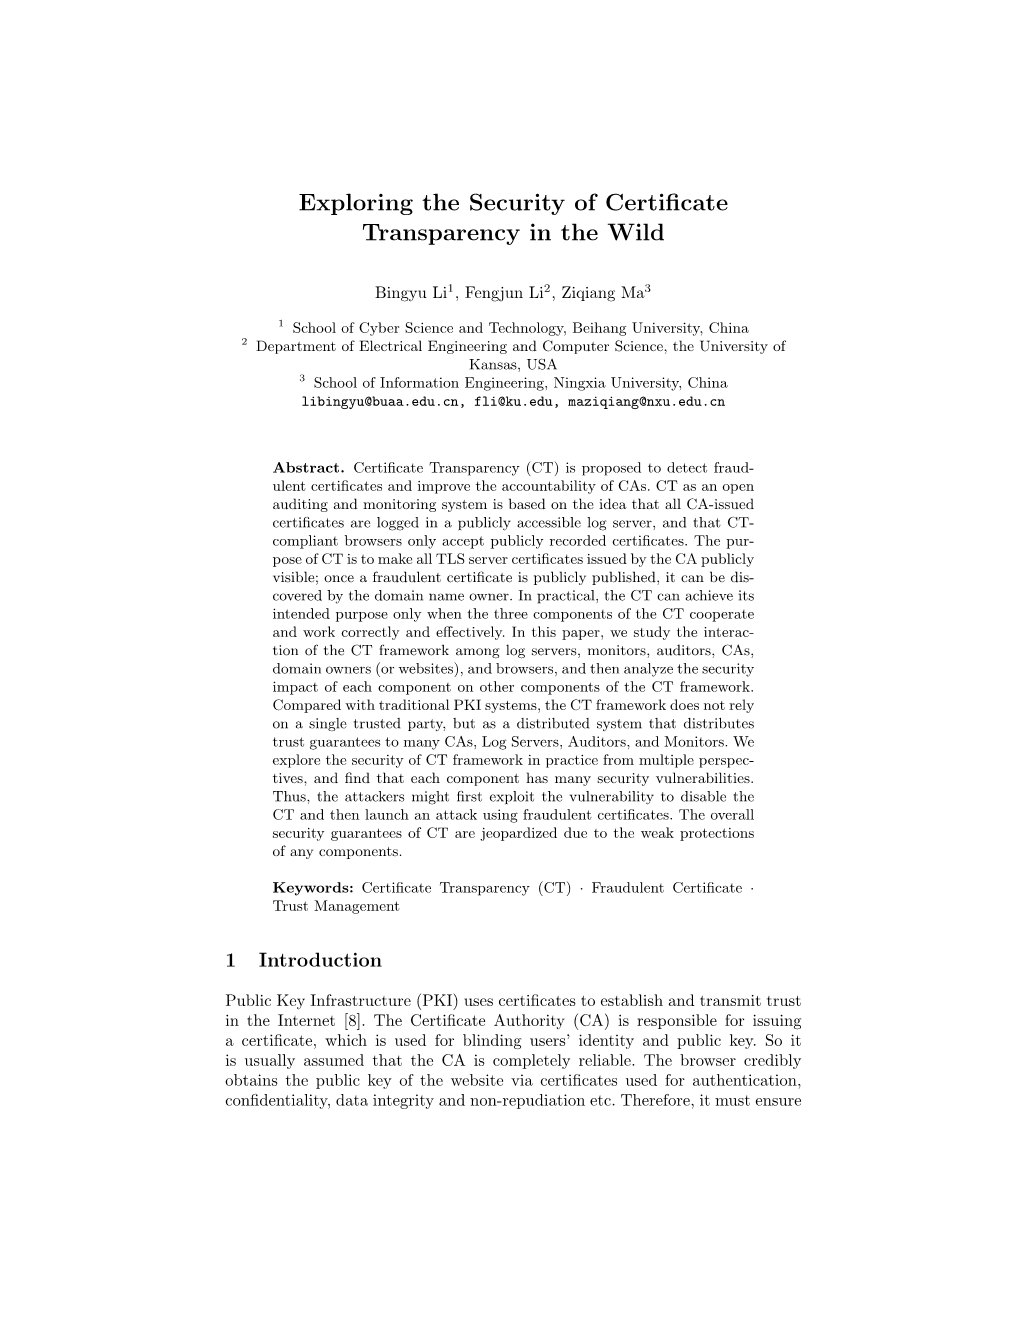 Exploring the Security of Certificate Transparency in the Wild